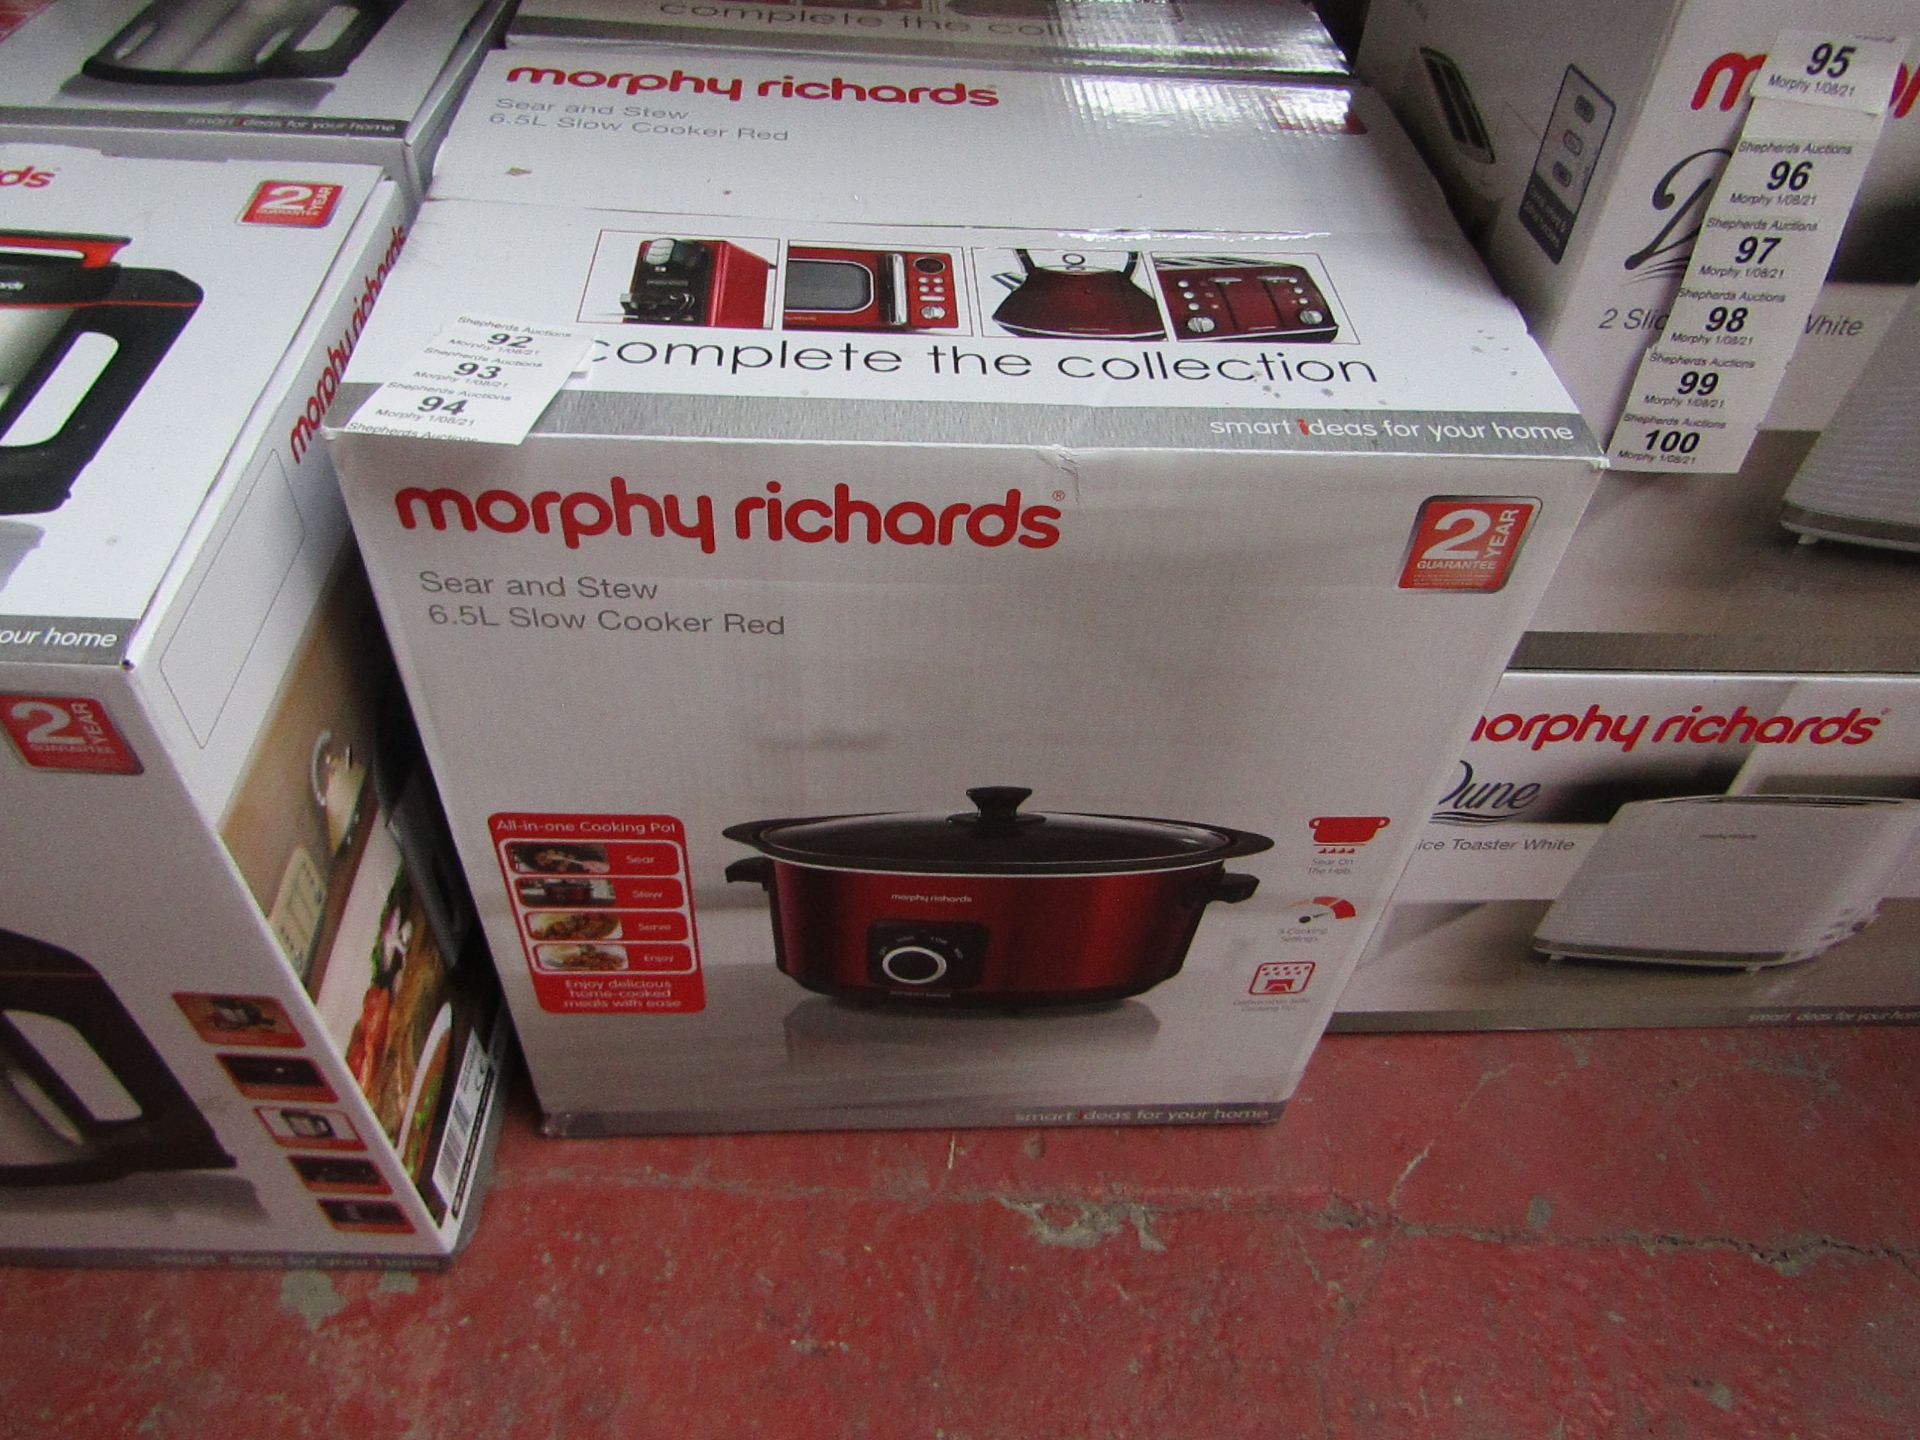 Morphy Richards sear and stew 6.5L slow cooker in red, brand new and boxed. RRP £29.99